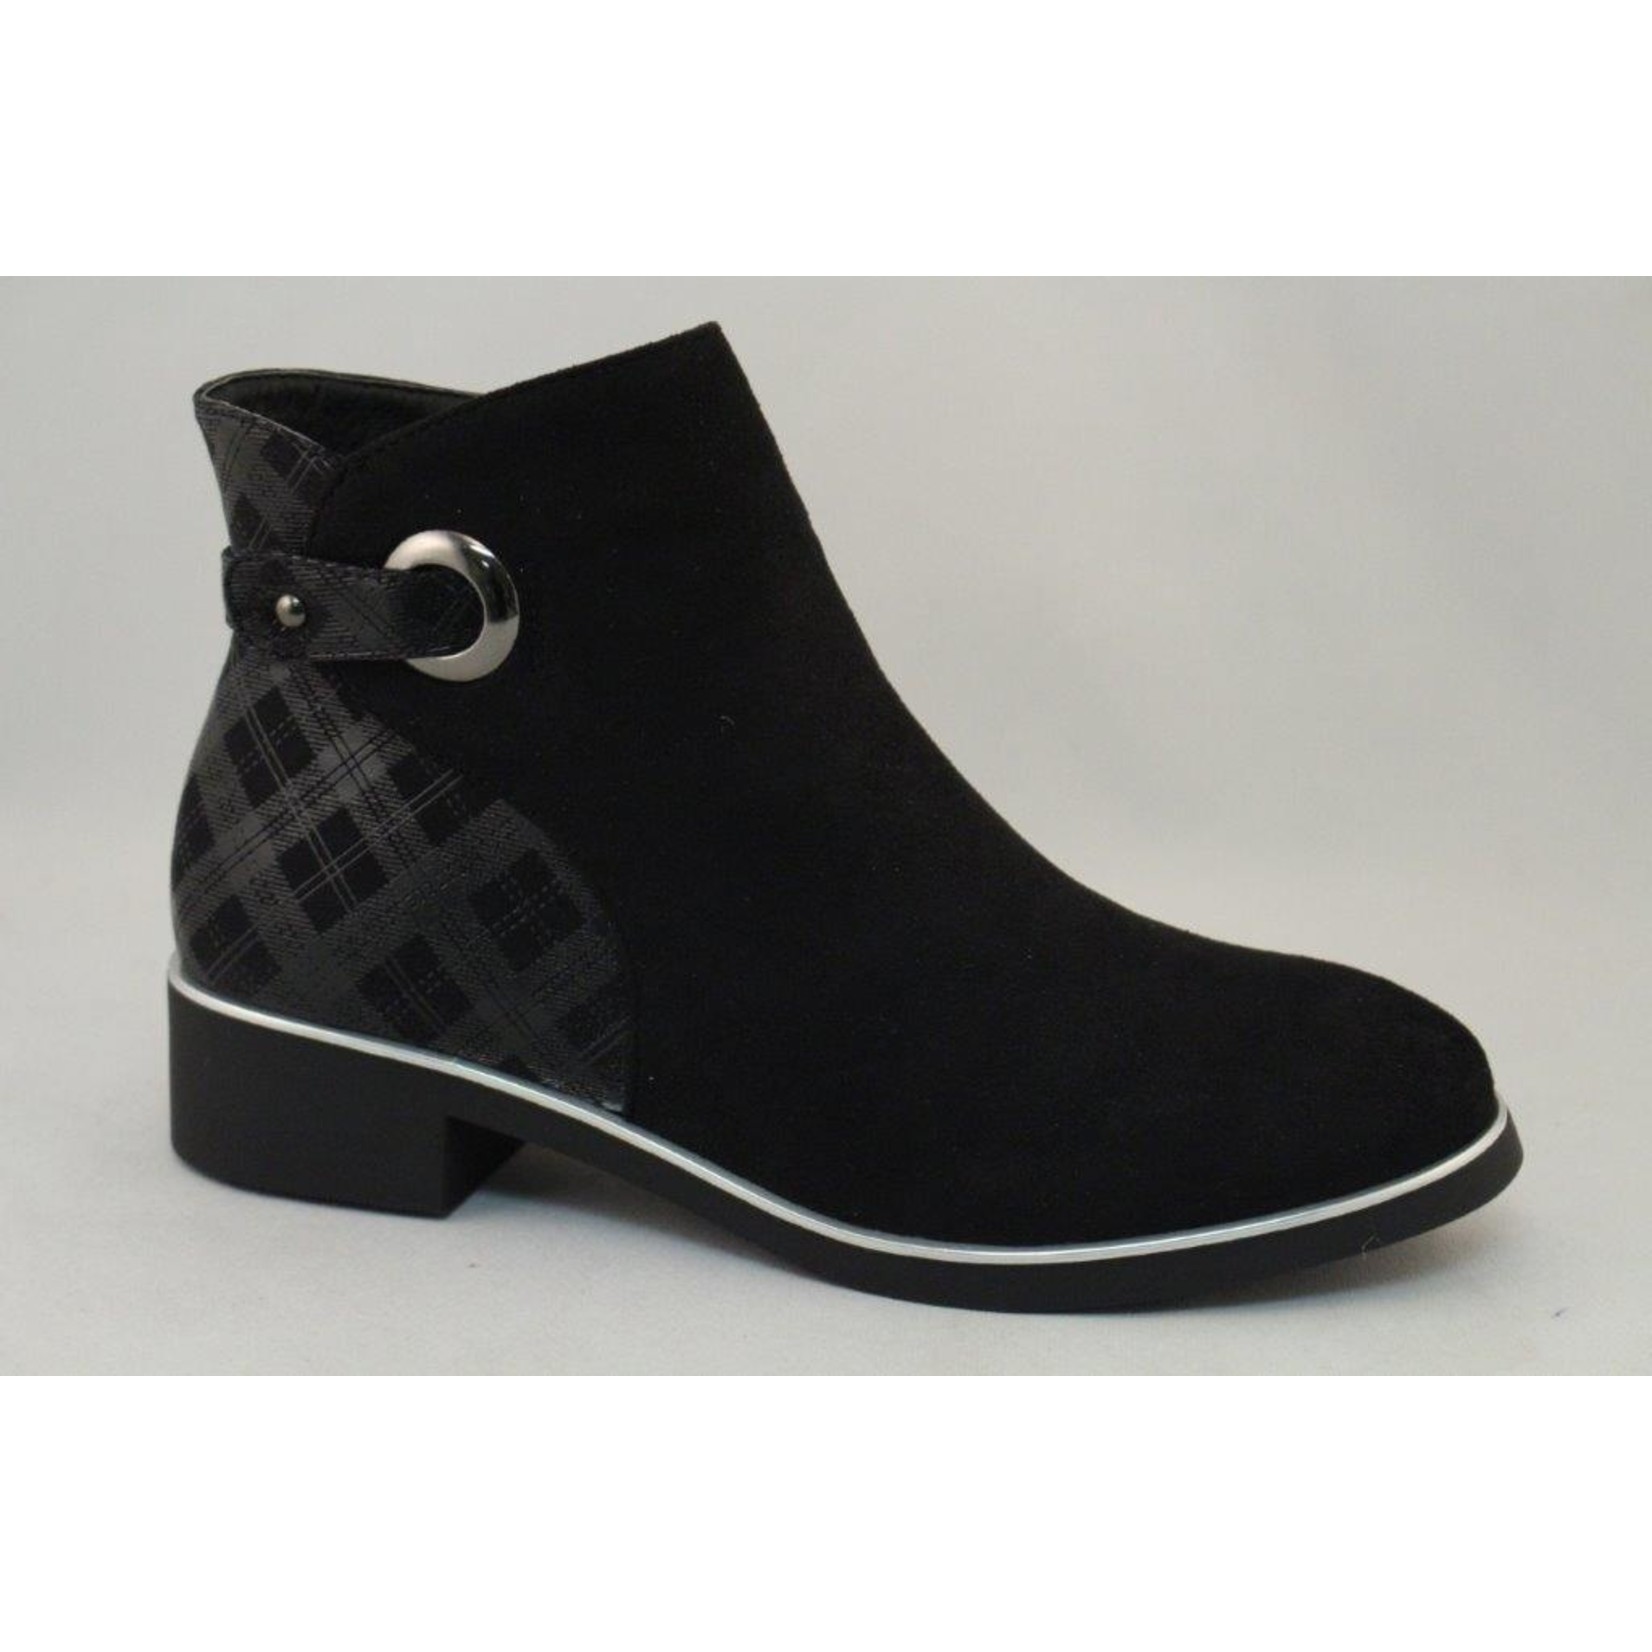 NYC NYC ladies ankle boot, womans boots, footwear, boots